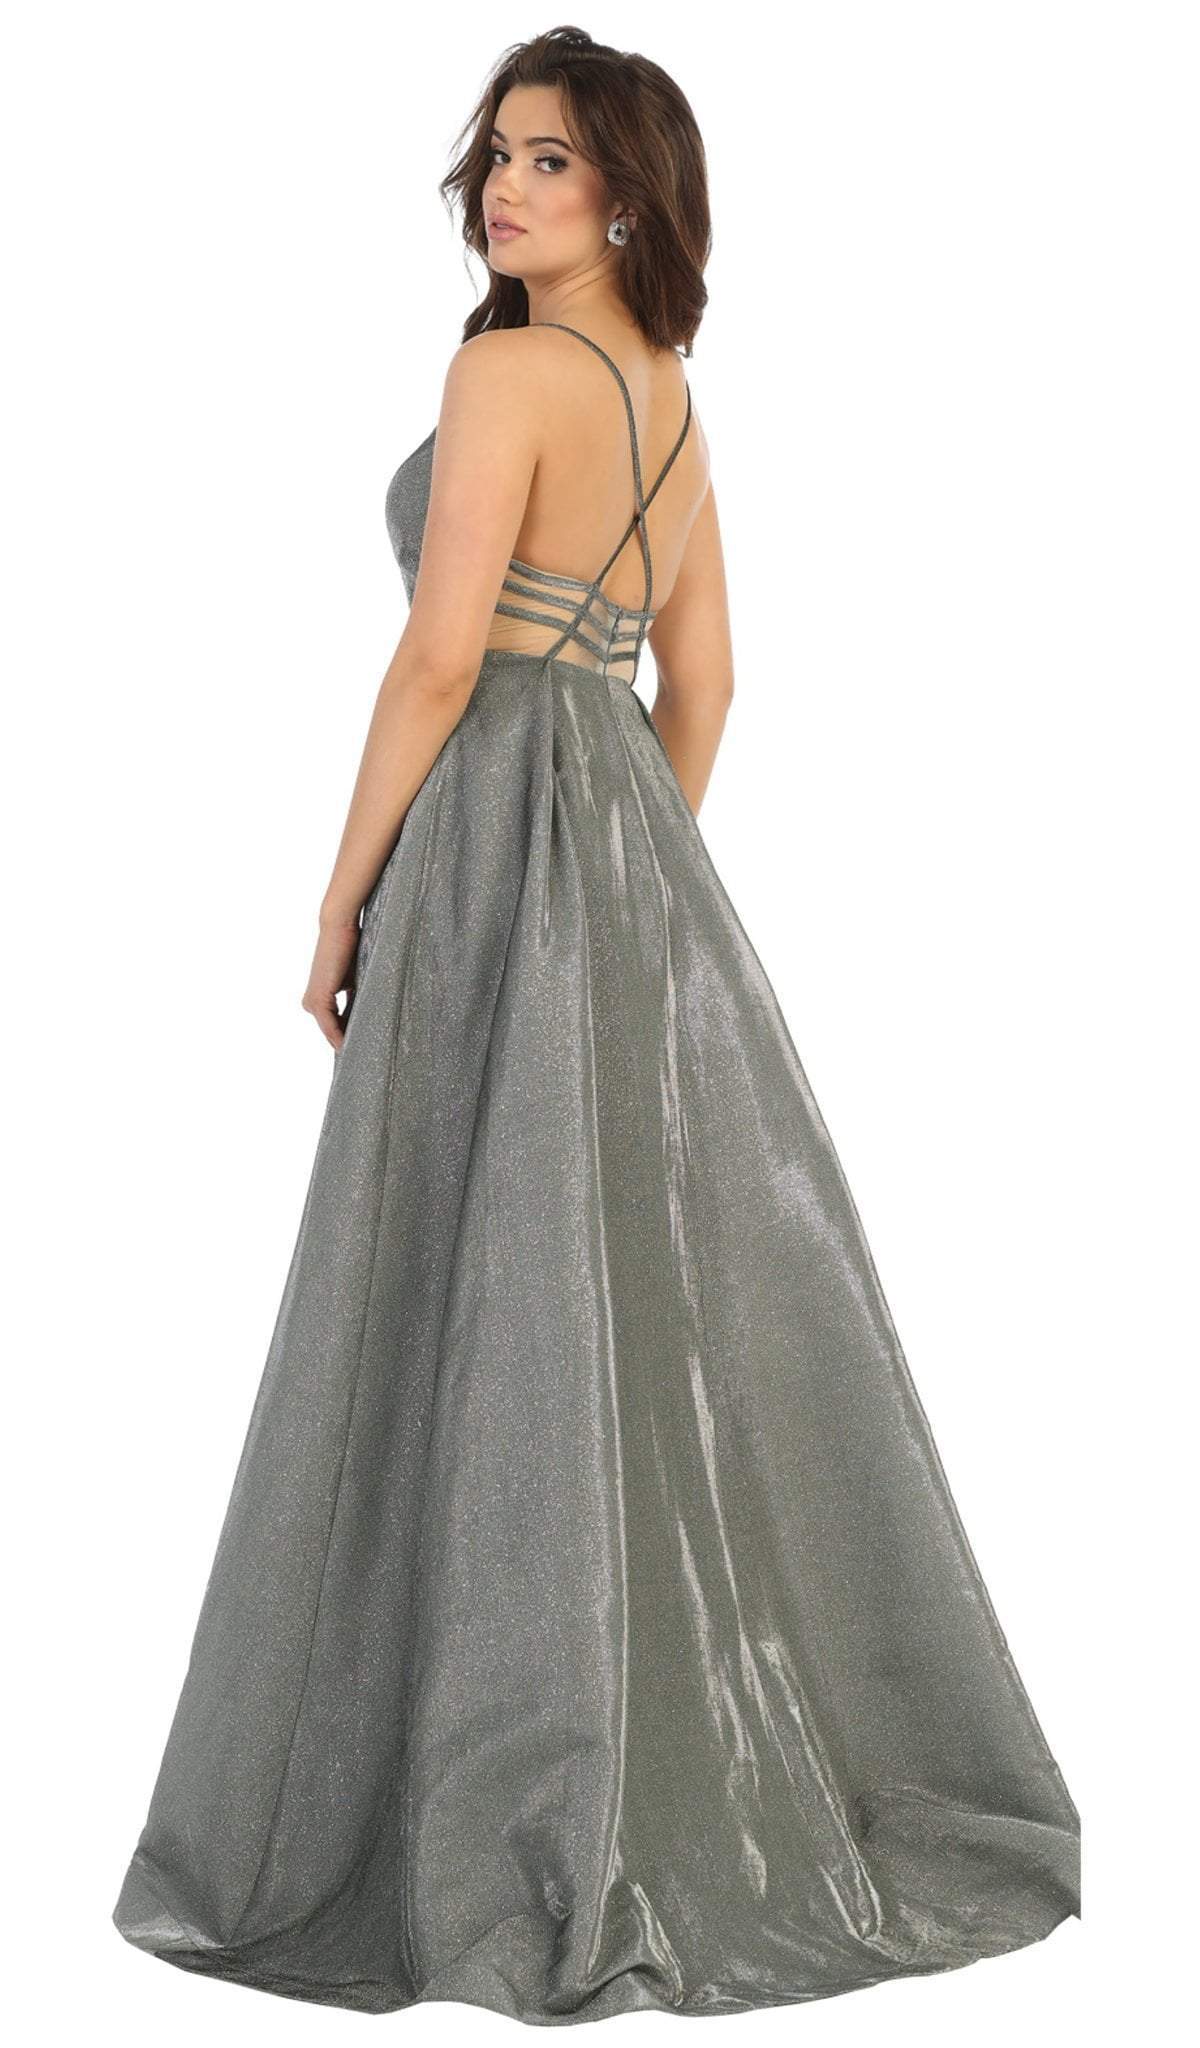 May Queen - RQ7759 Plunging Sweetheart Metallic A-Line Gown Special Occasion Dress